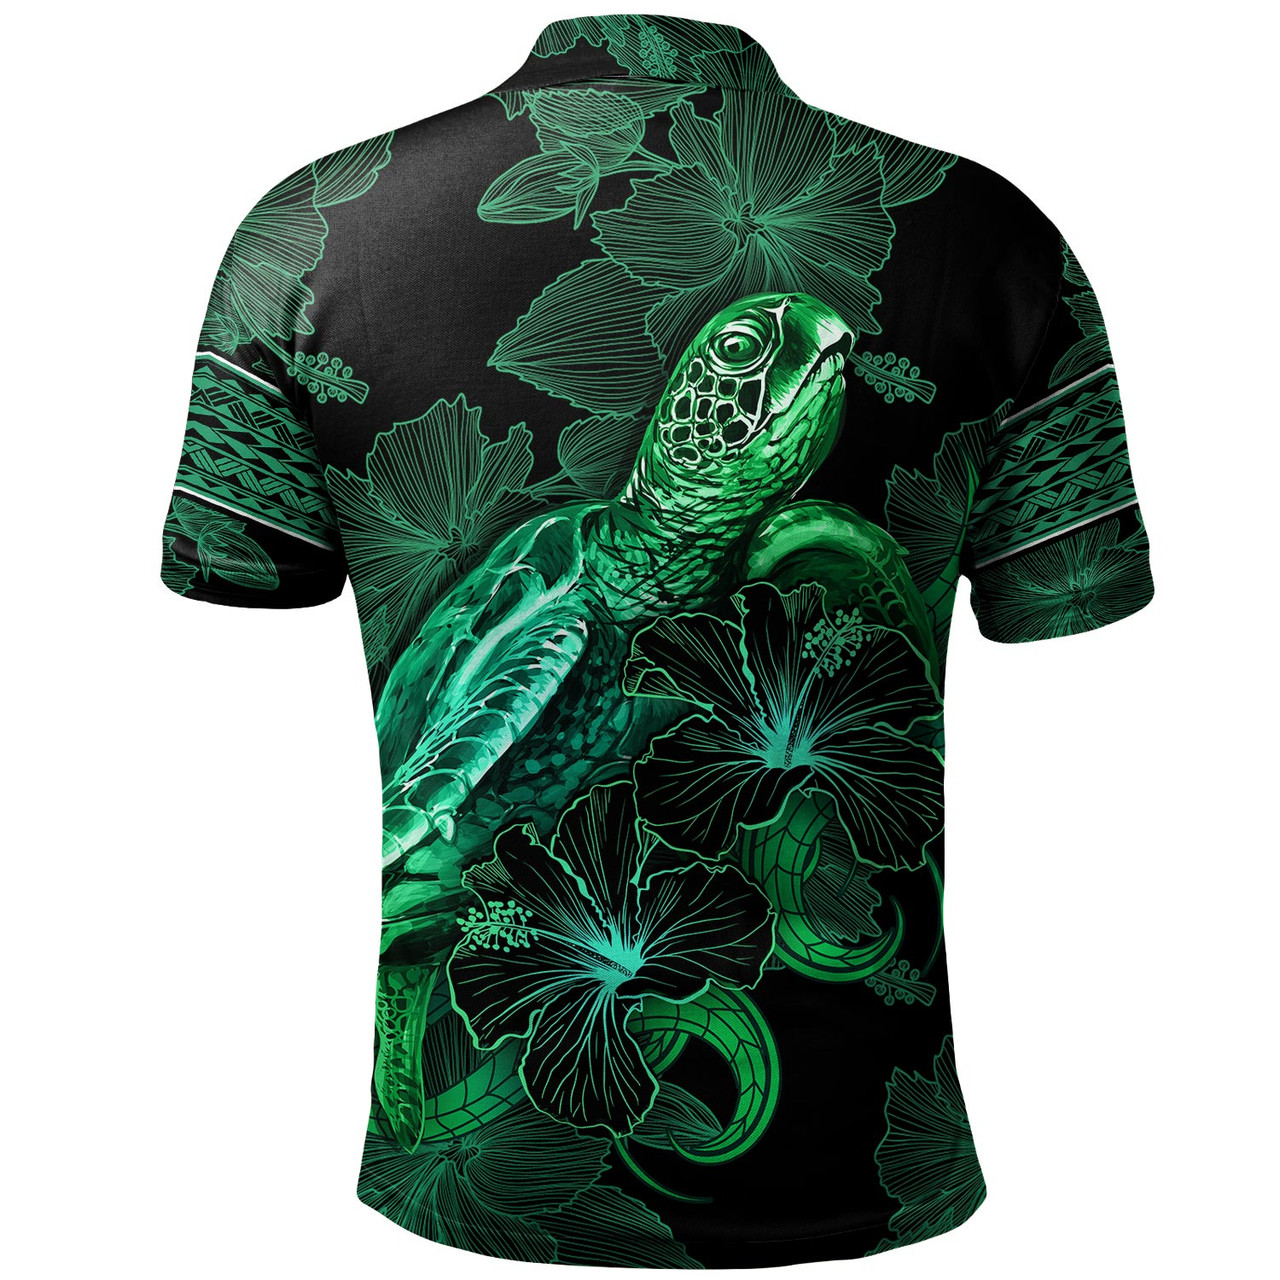 Federated States Of Micronesia Polo Shirt  Sea Turtle With Blooming Hibiscus Flowers Tribal Green